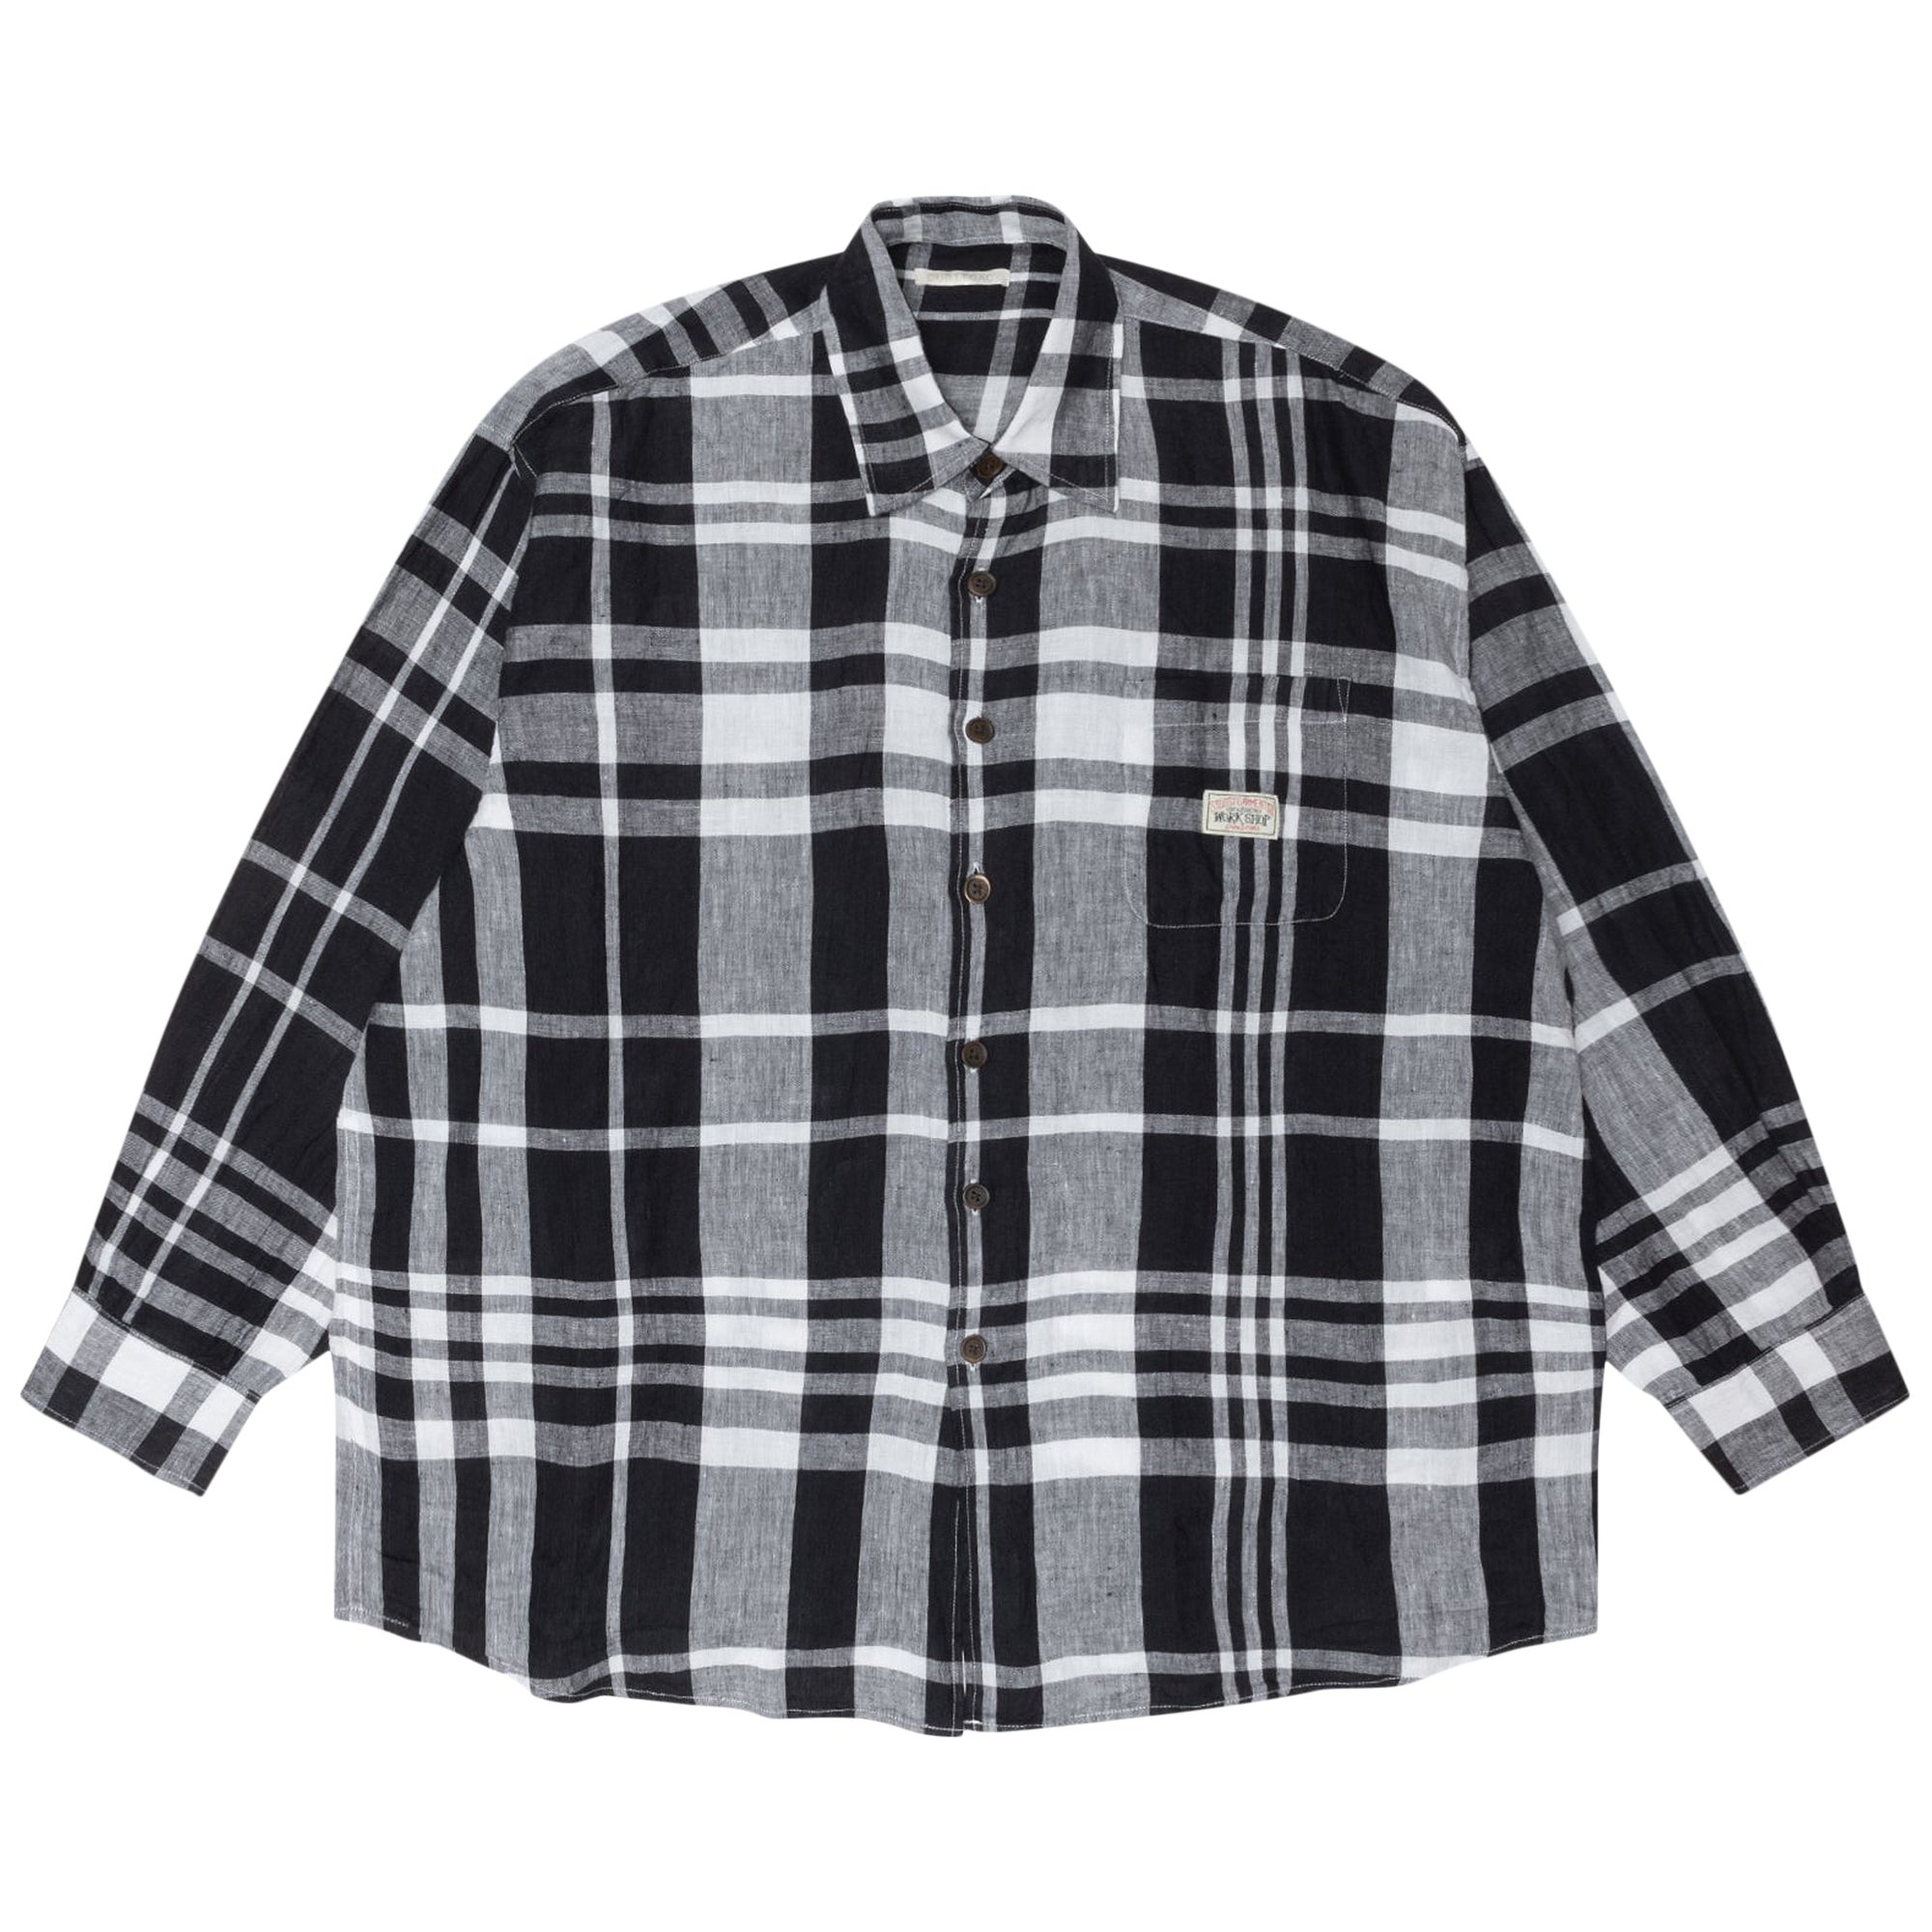 Buy Stussy x Our Legacy Work Shop Borrowed Shirt 'Bold Check Linen